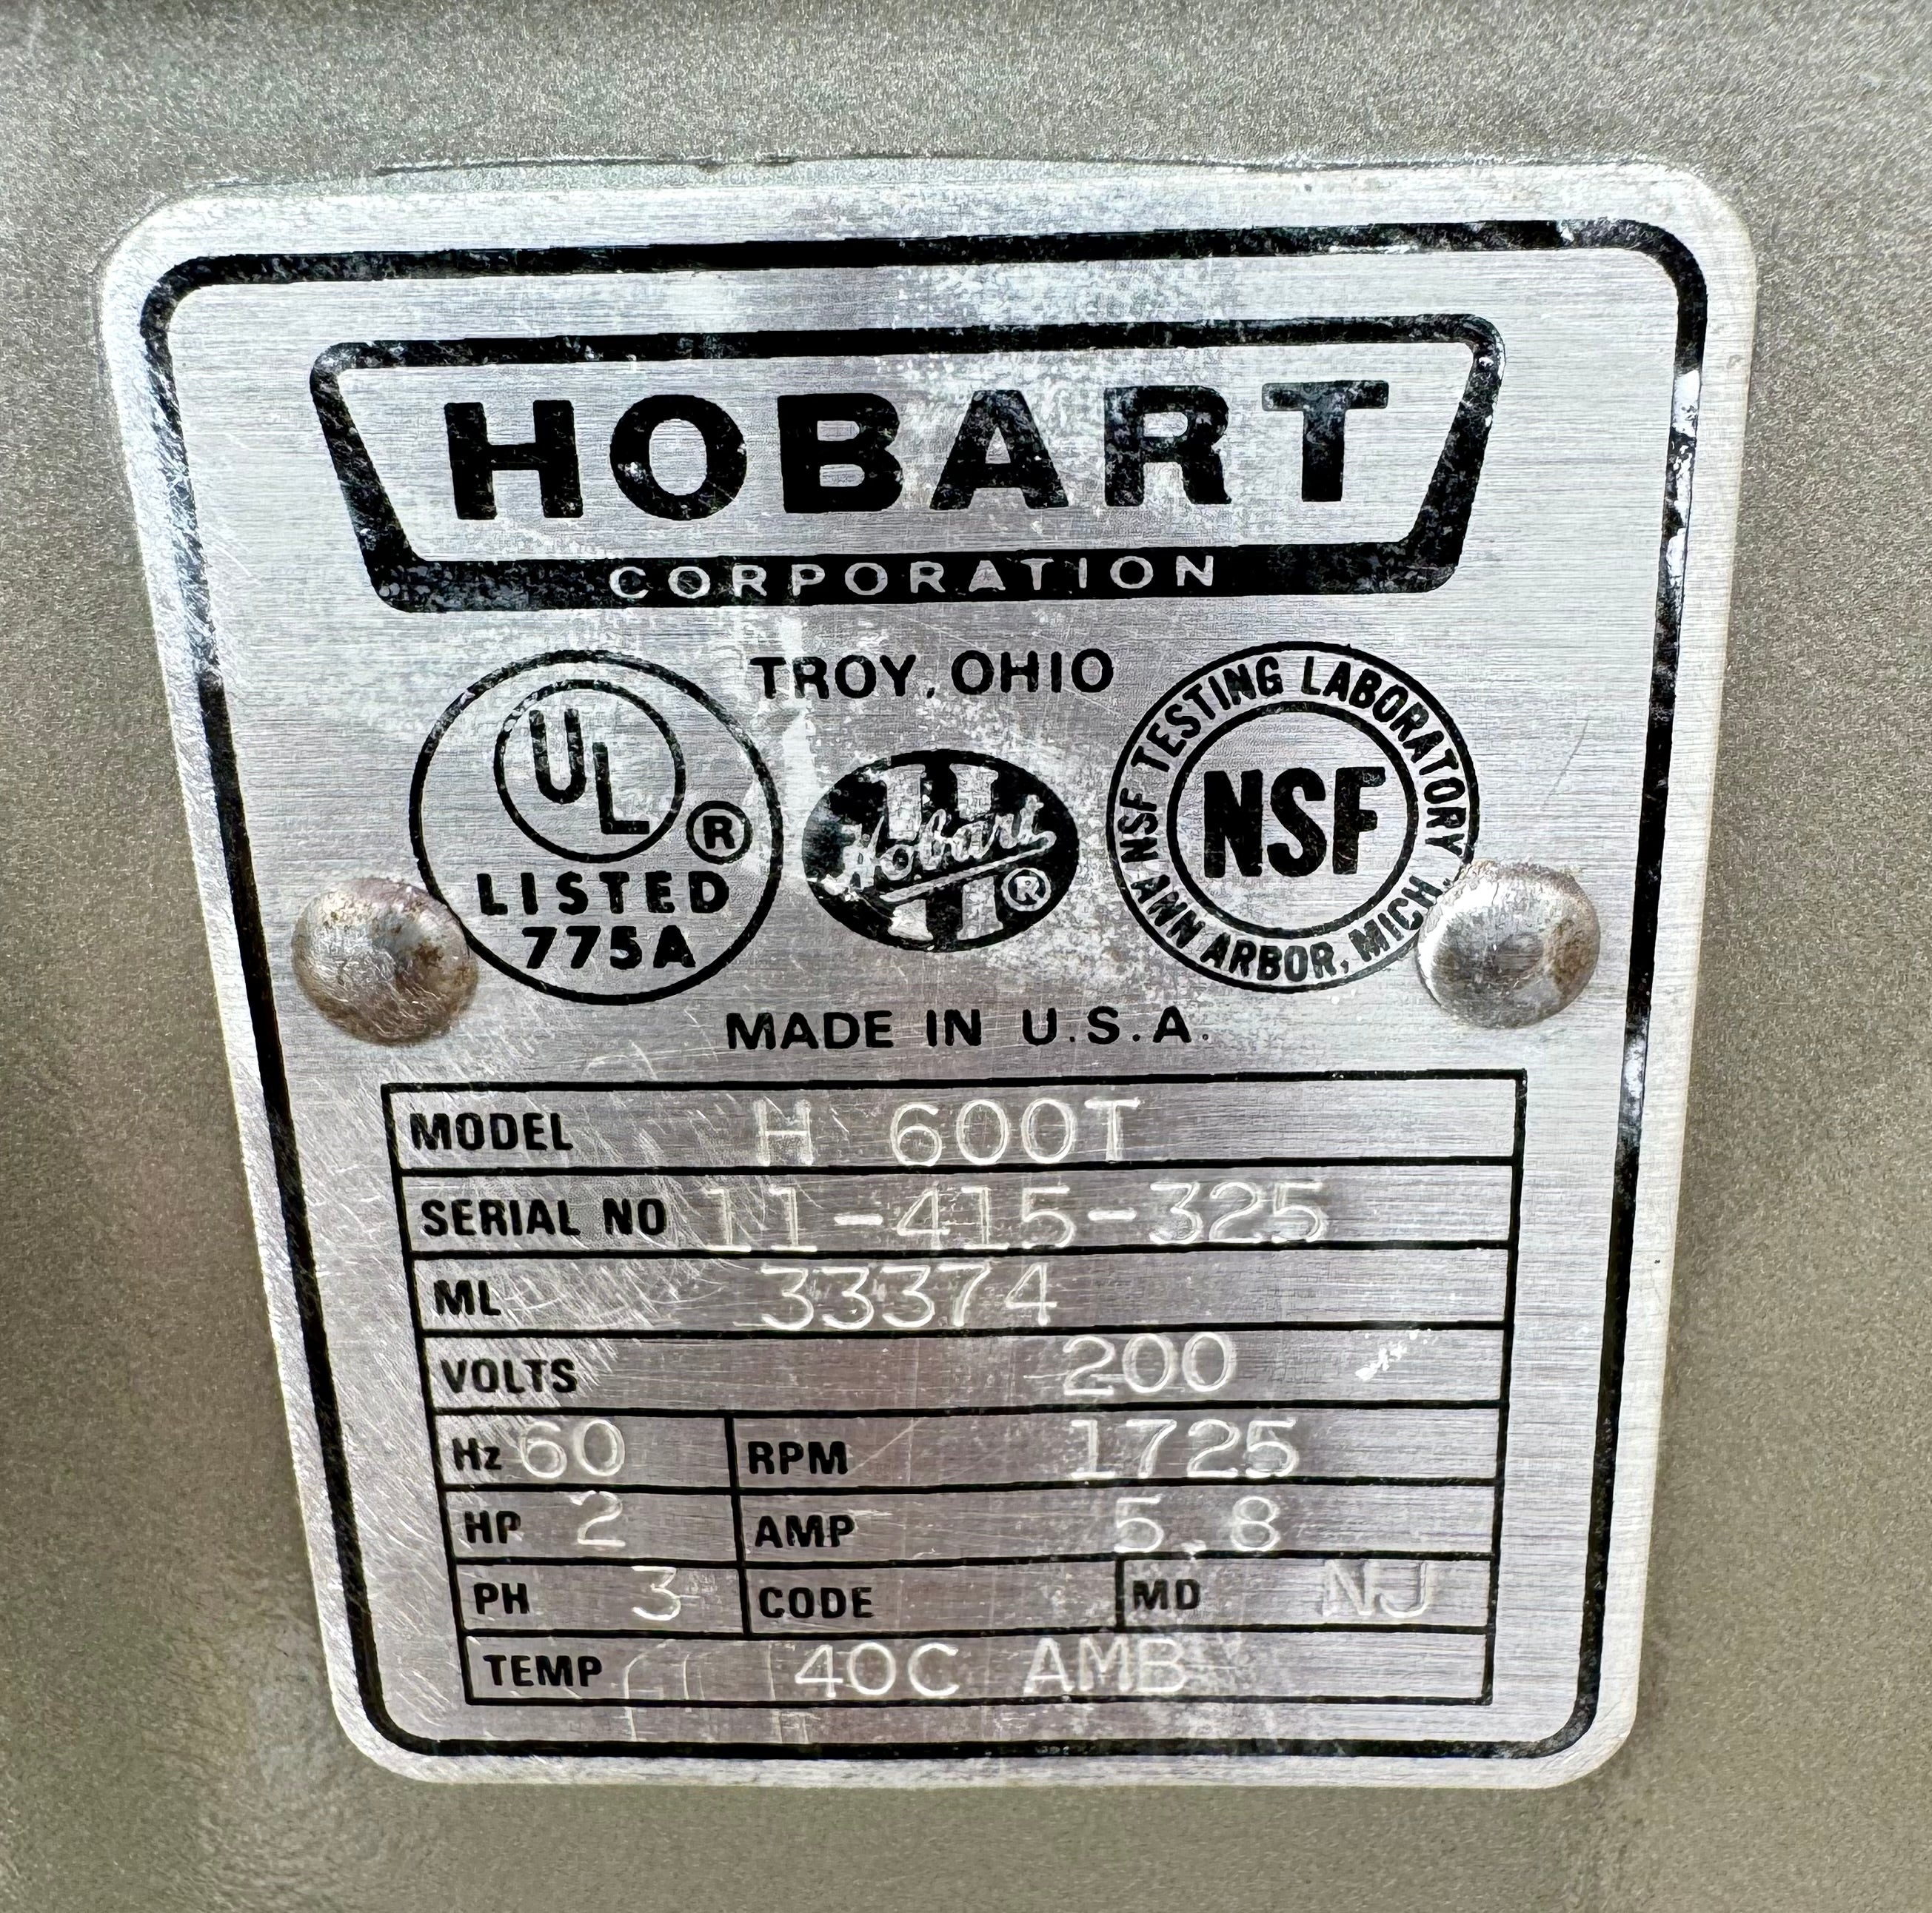 Hobart h600t 60 quart mixer 3 phase 2 HP comes with SS bowl and 1 attachment